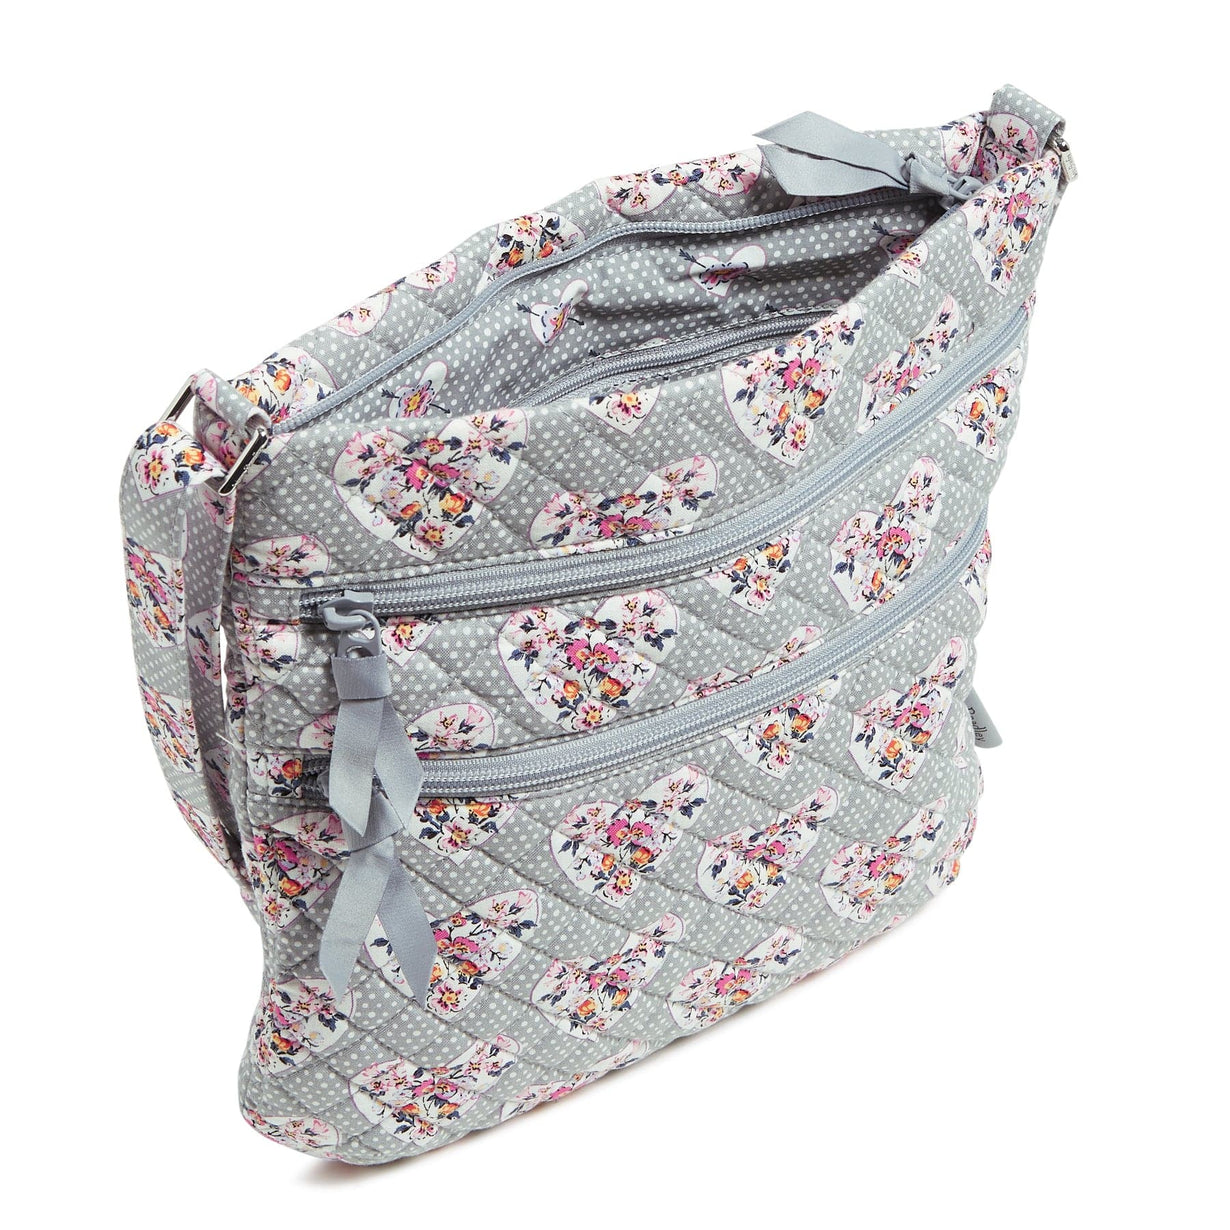 Gray hipster crossbody bag with while polka dots and hearts with flowers pattern